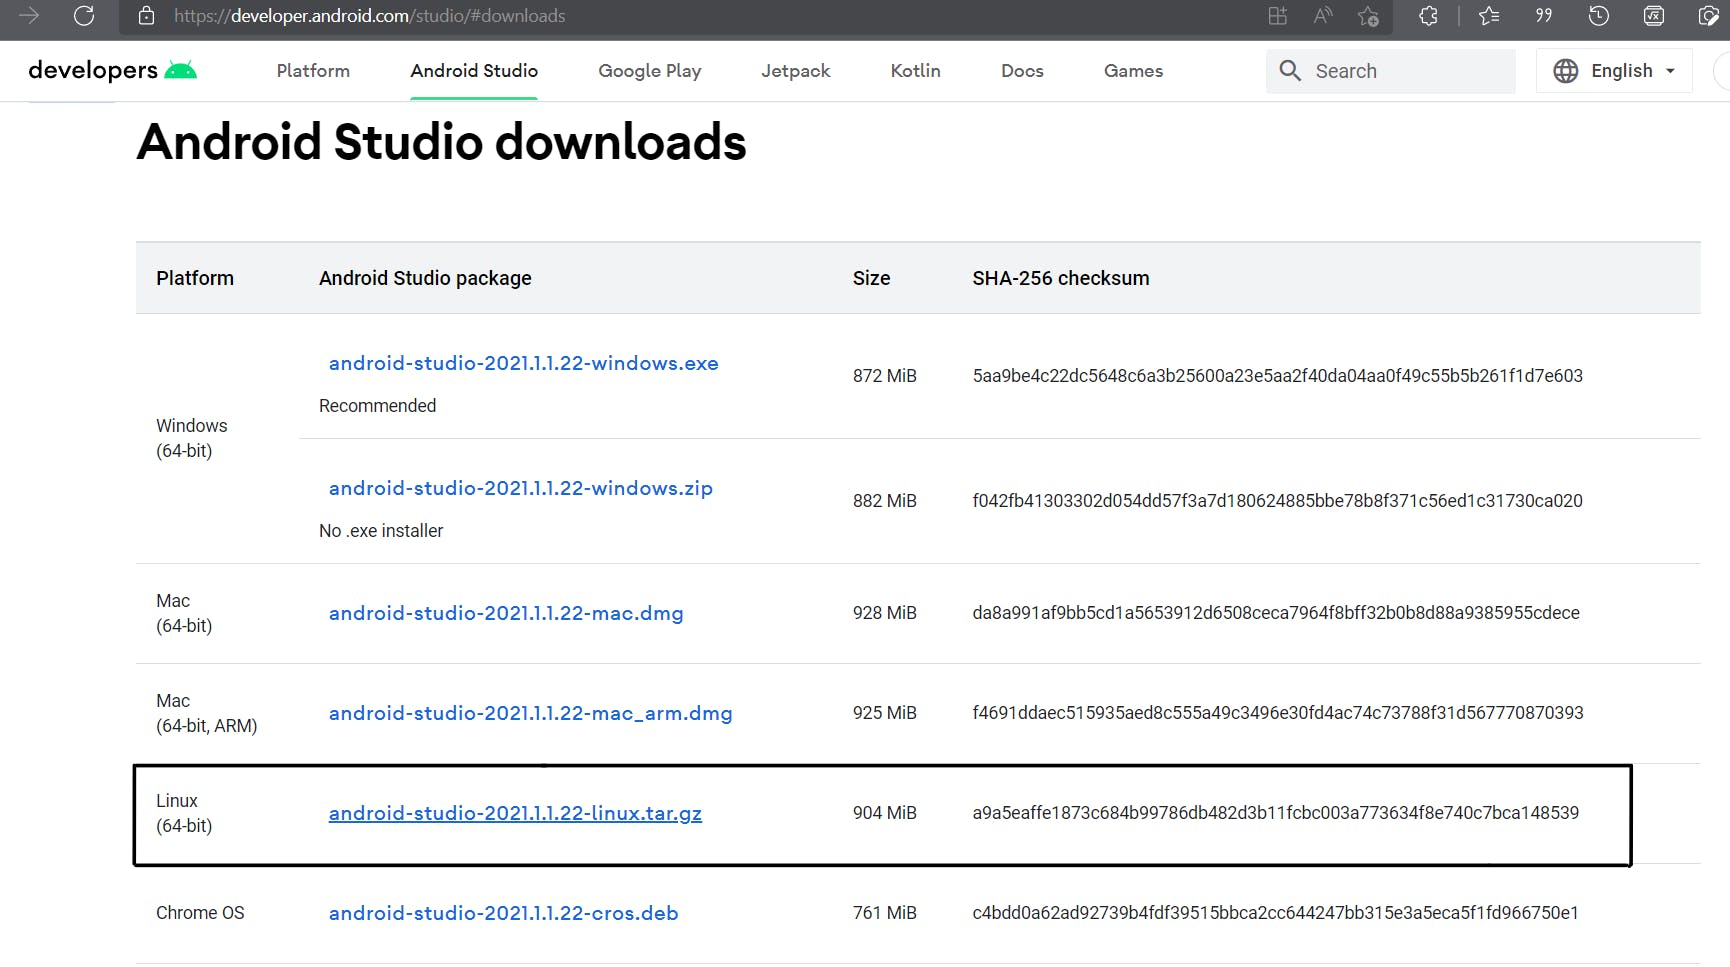 This image shows the Android Studio Downloads Page